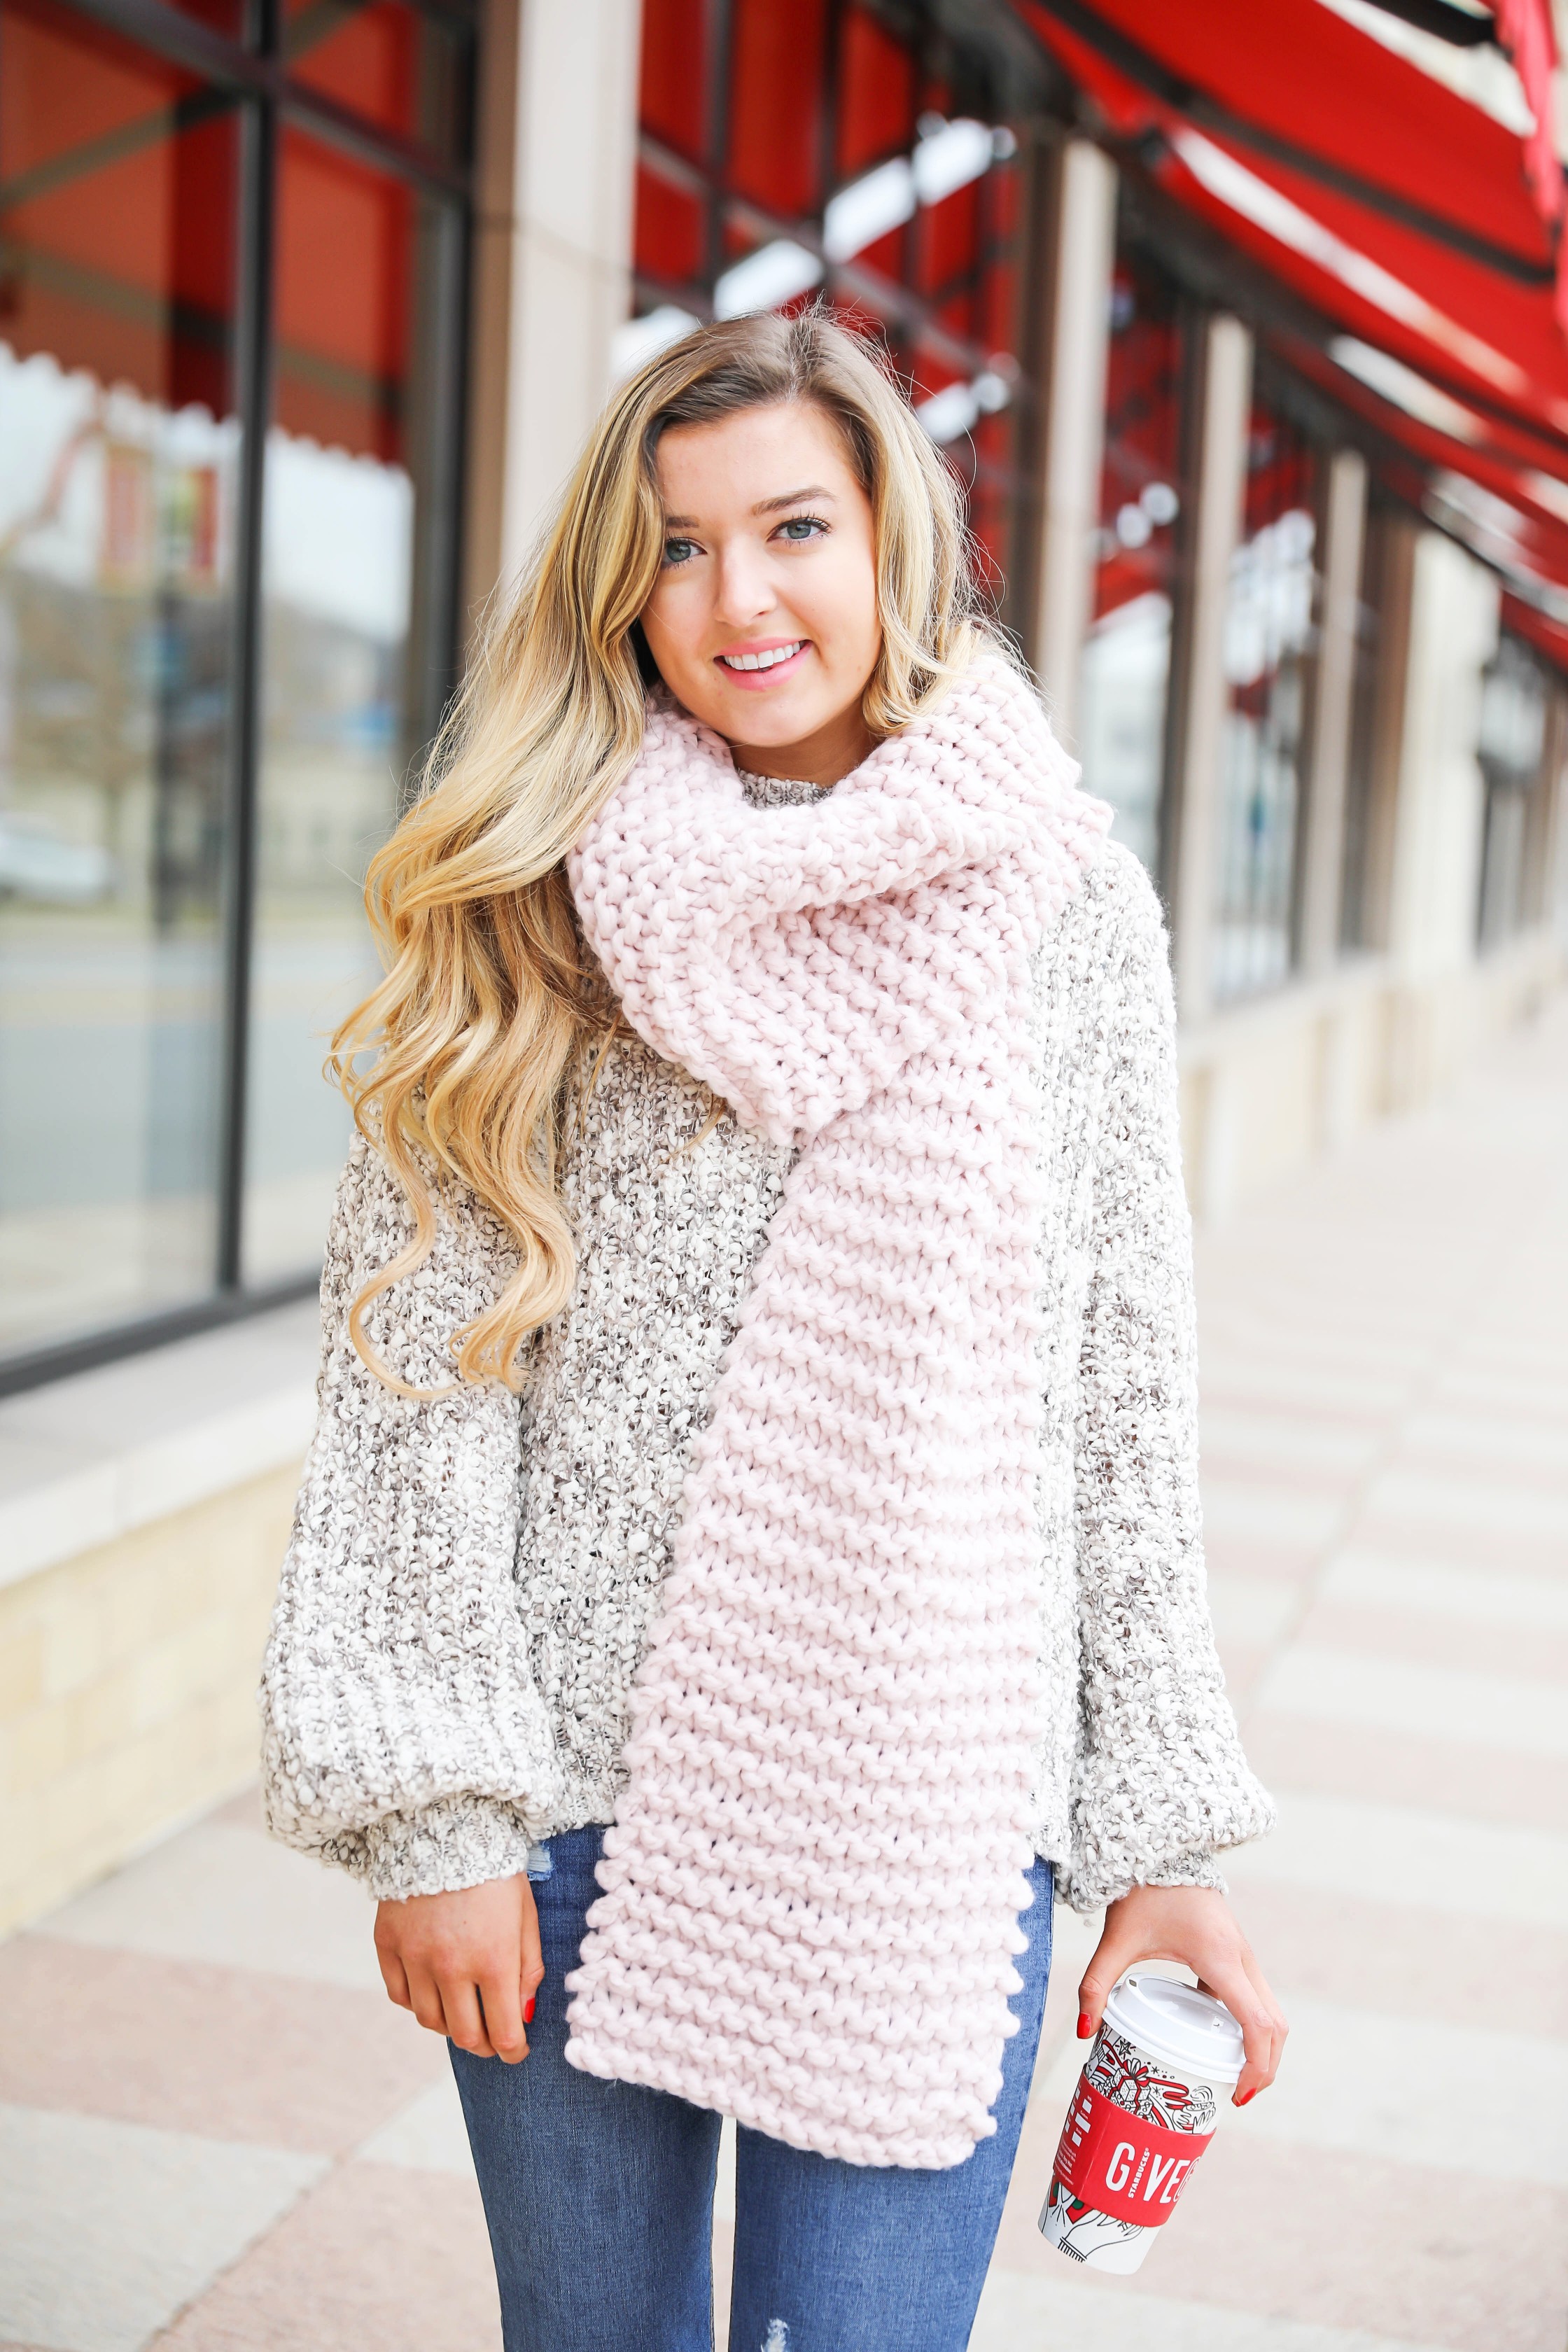 Huge knit scarf and cozy knit sweater with frye riding boots! Such a super cute winter outfit idea! Red cup from Starbucks with a cute winter outfit! Details on fashion blog daily dose of charm lauren lindmark